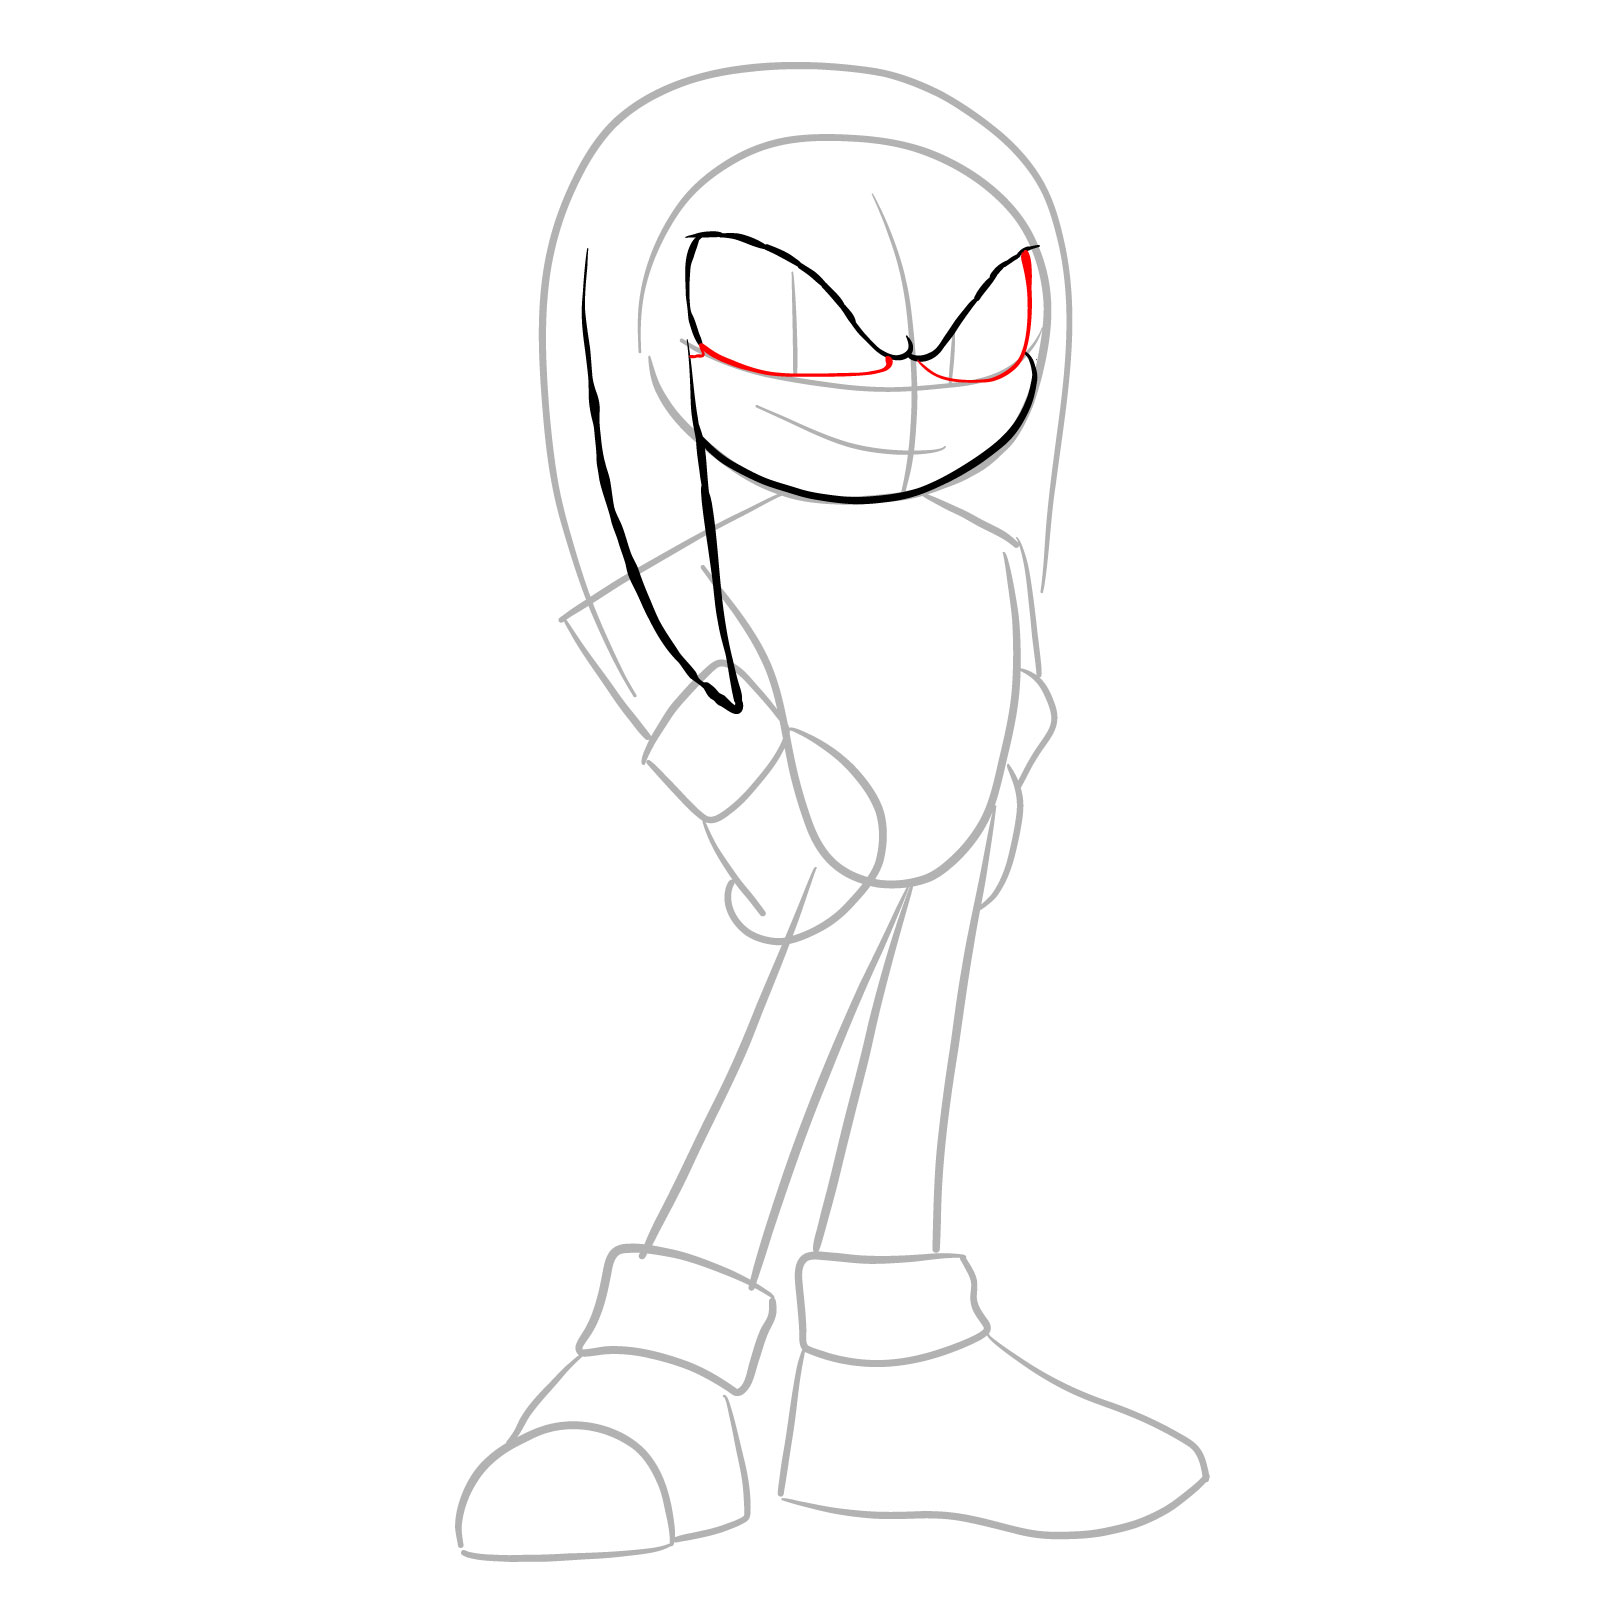 How to draw Knuckles from the movie - step 07